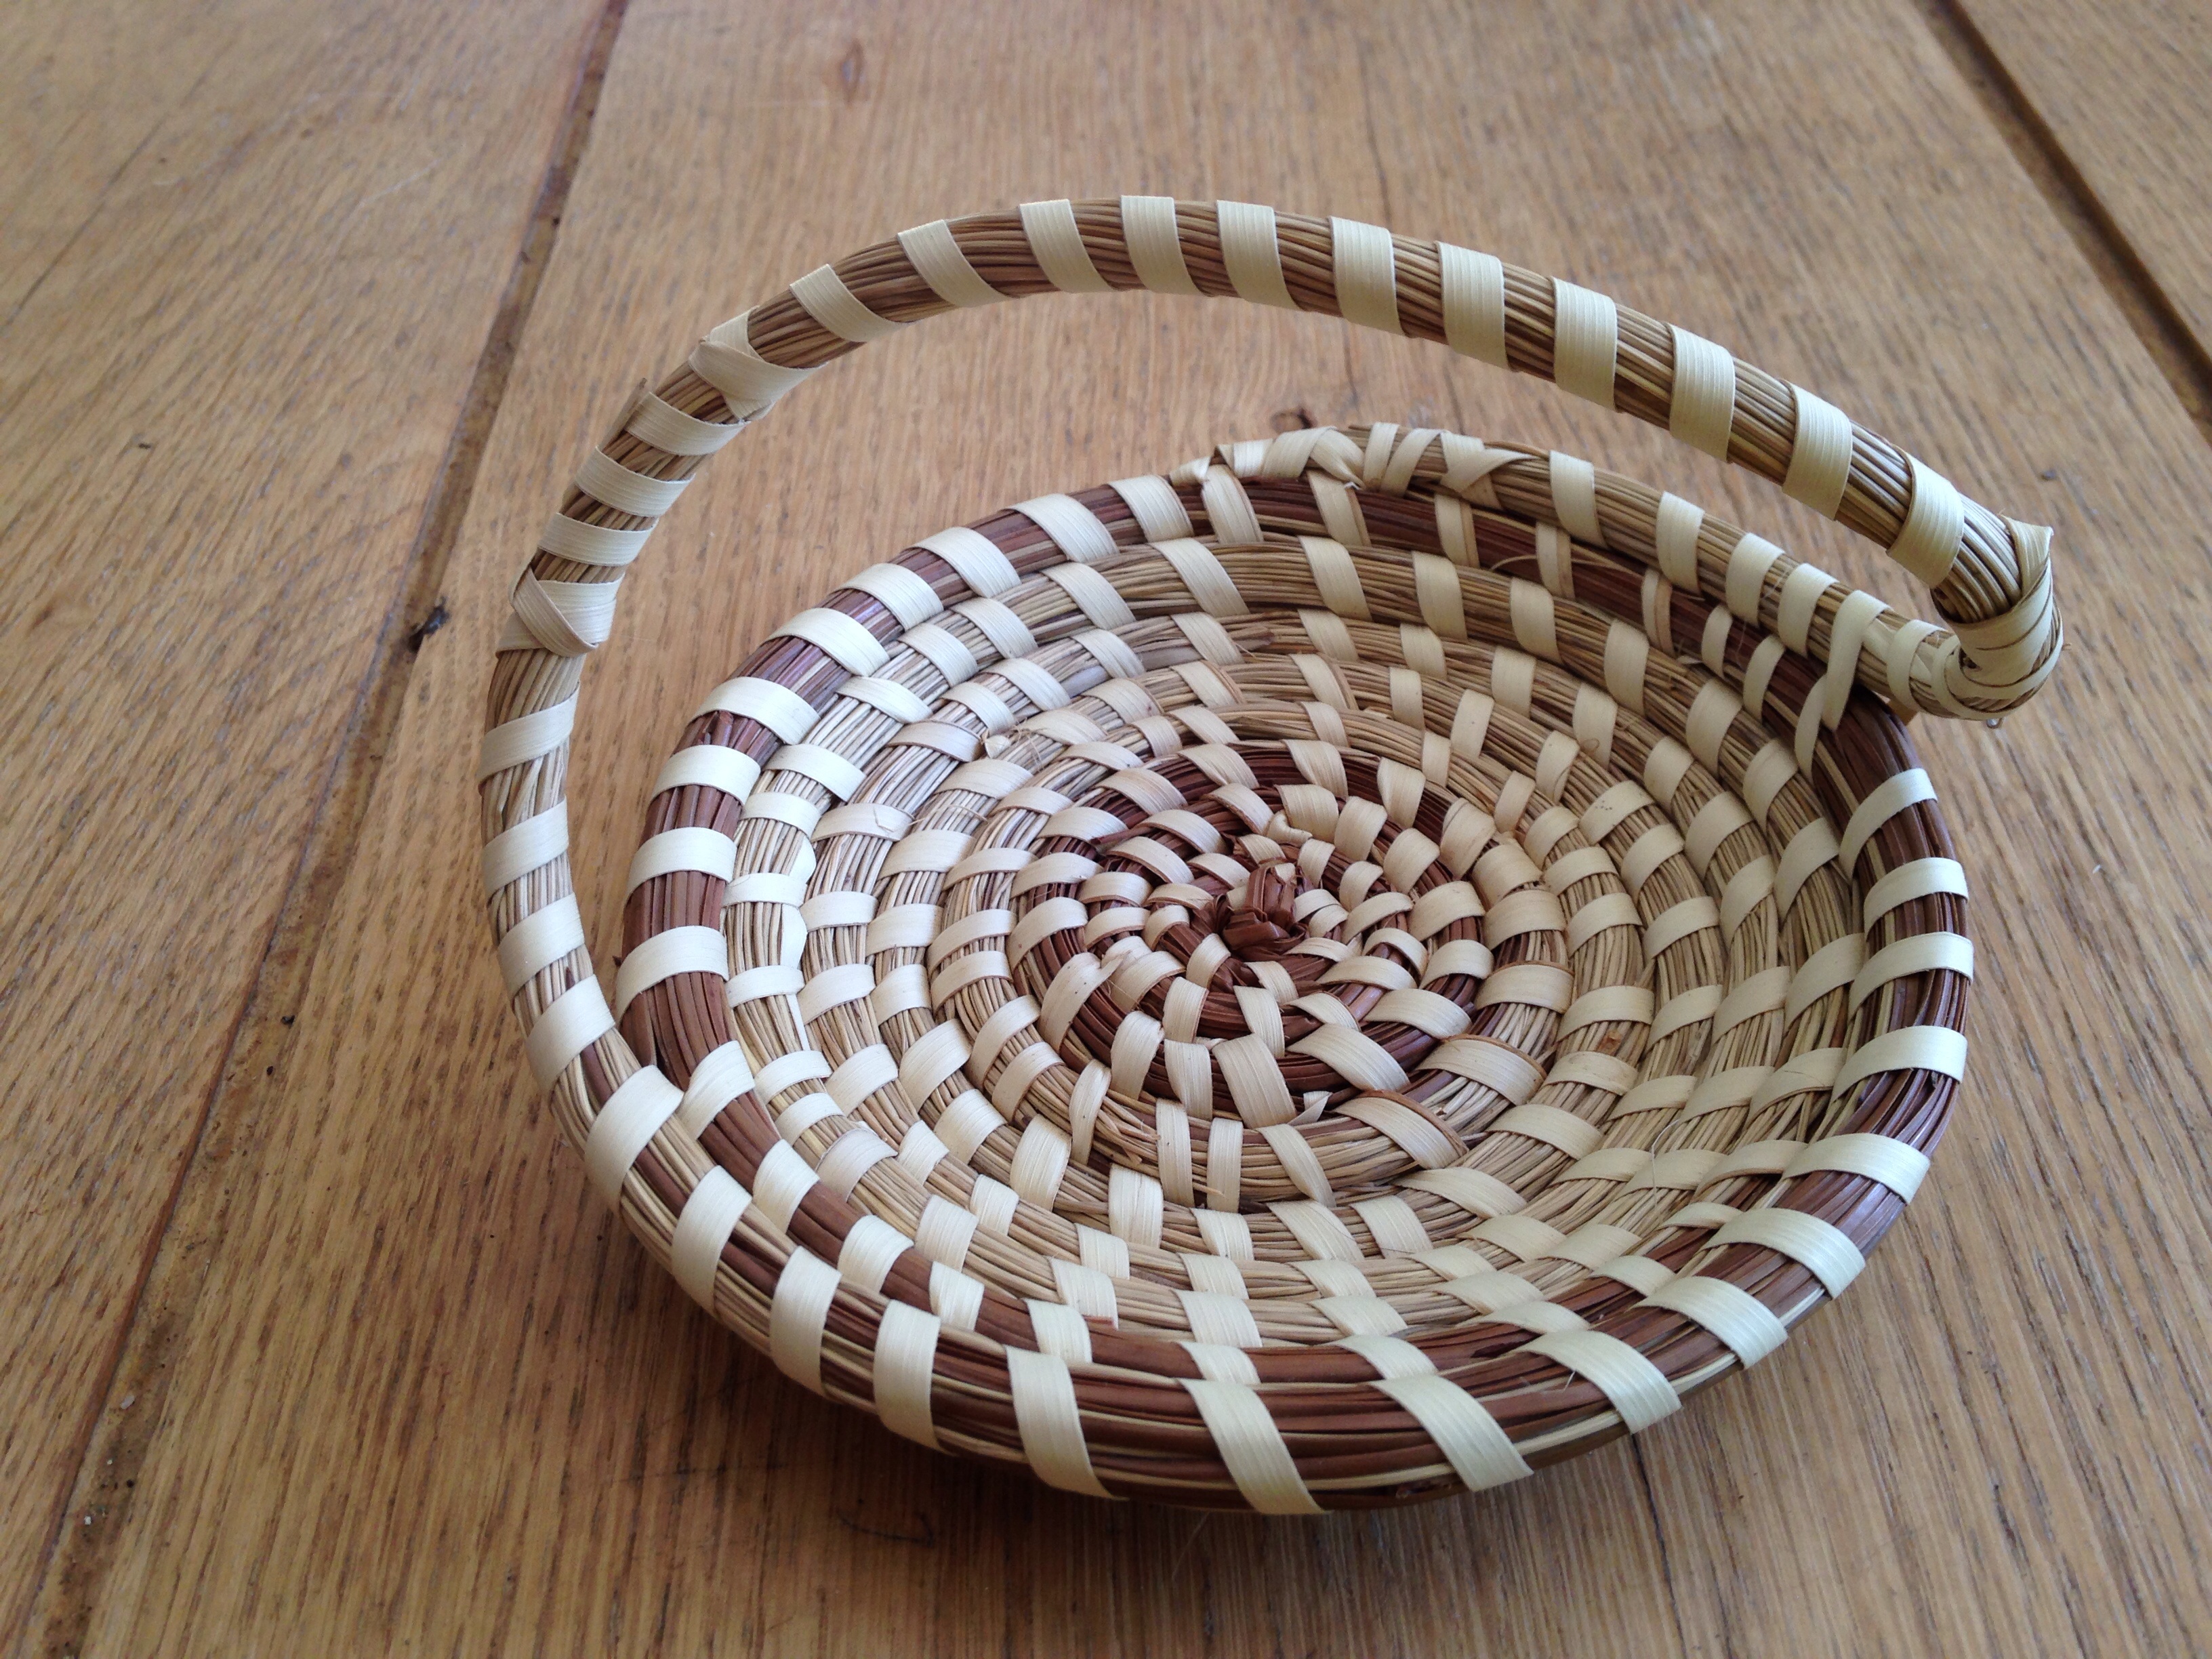 Coiled sweetgrass and pine needle basket from Charleston